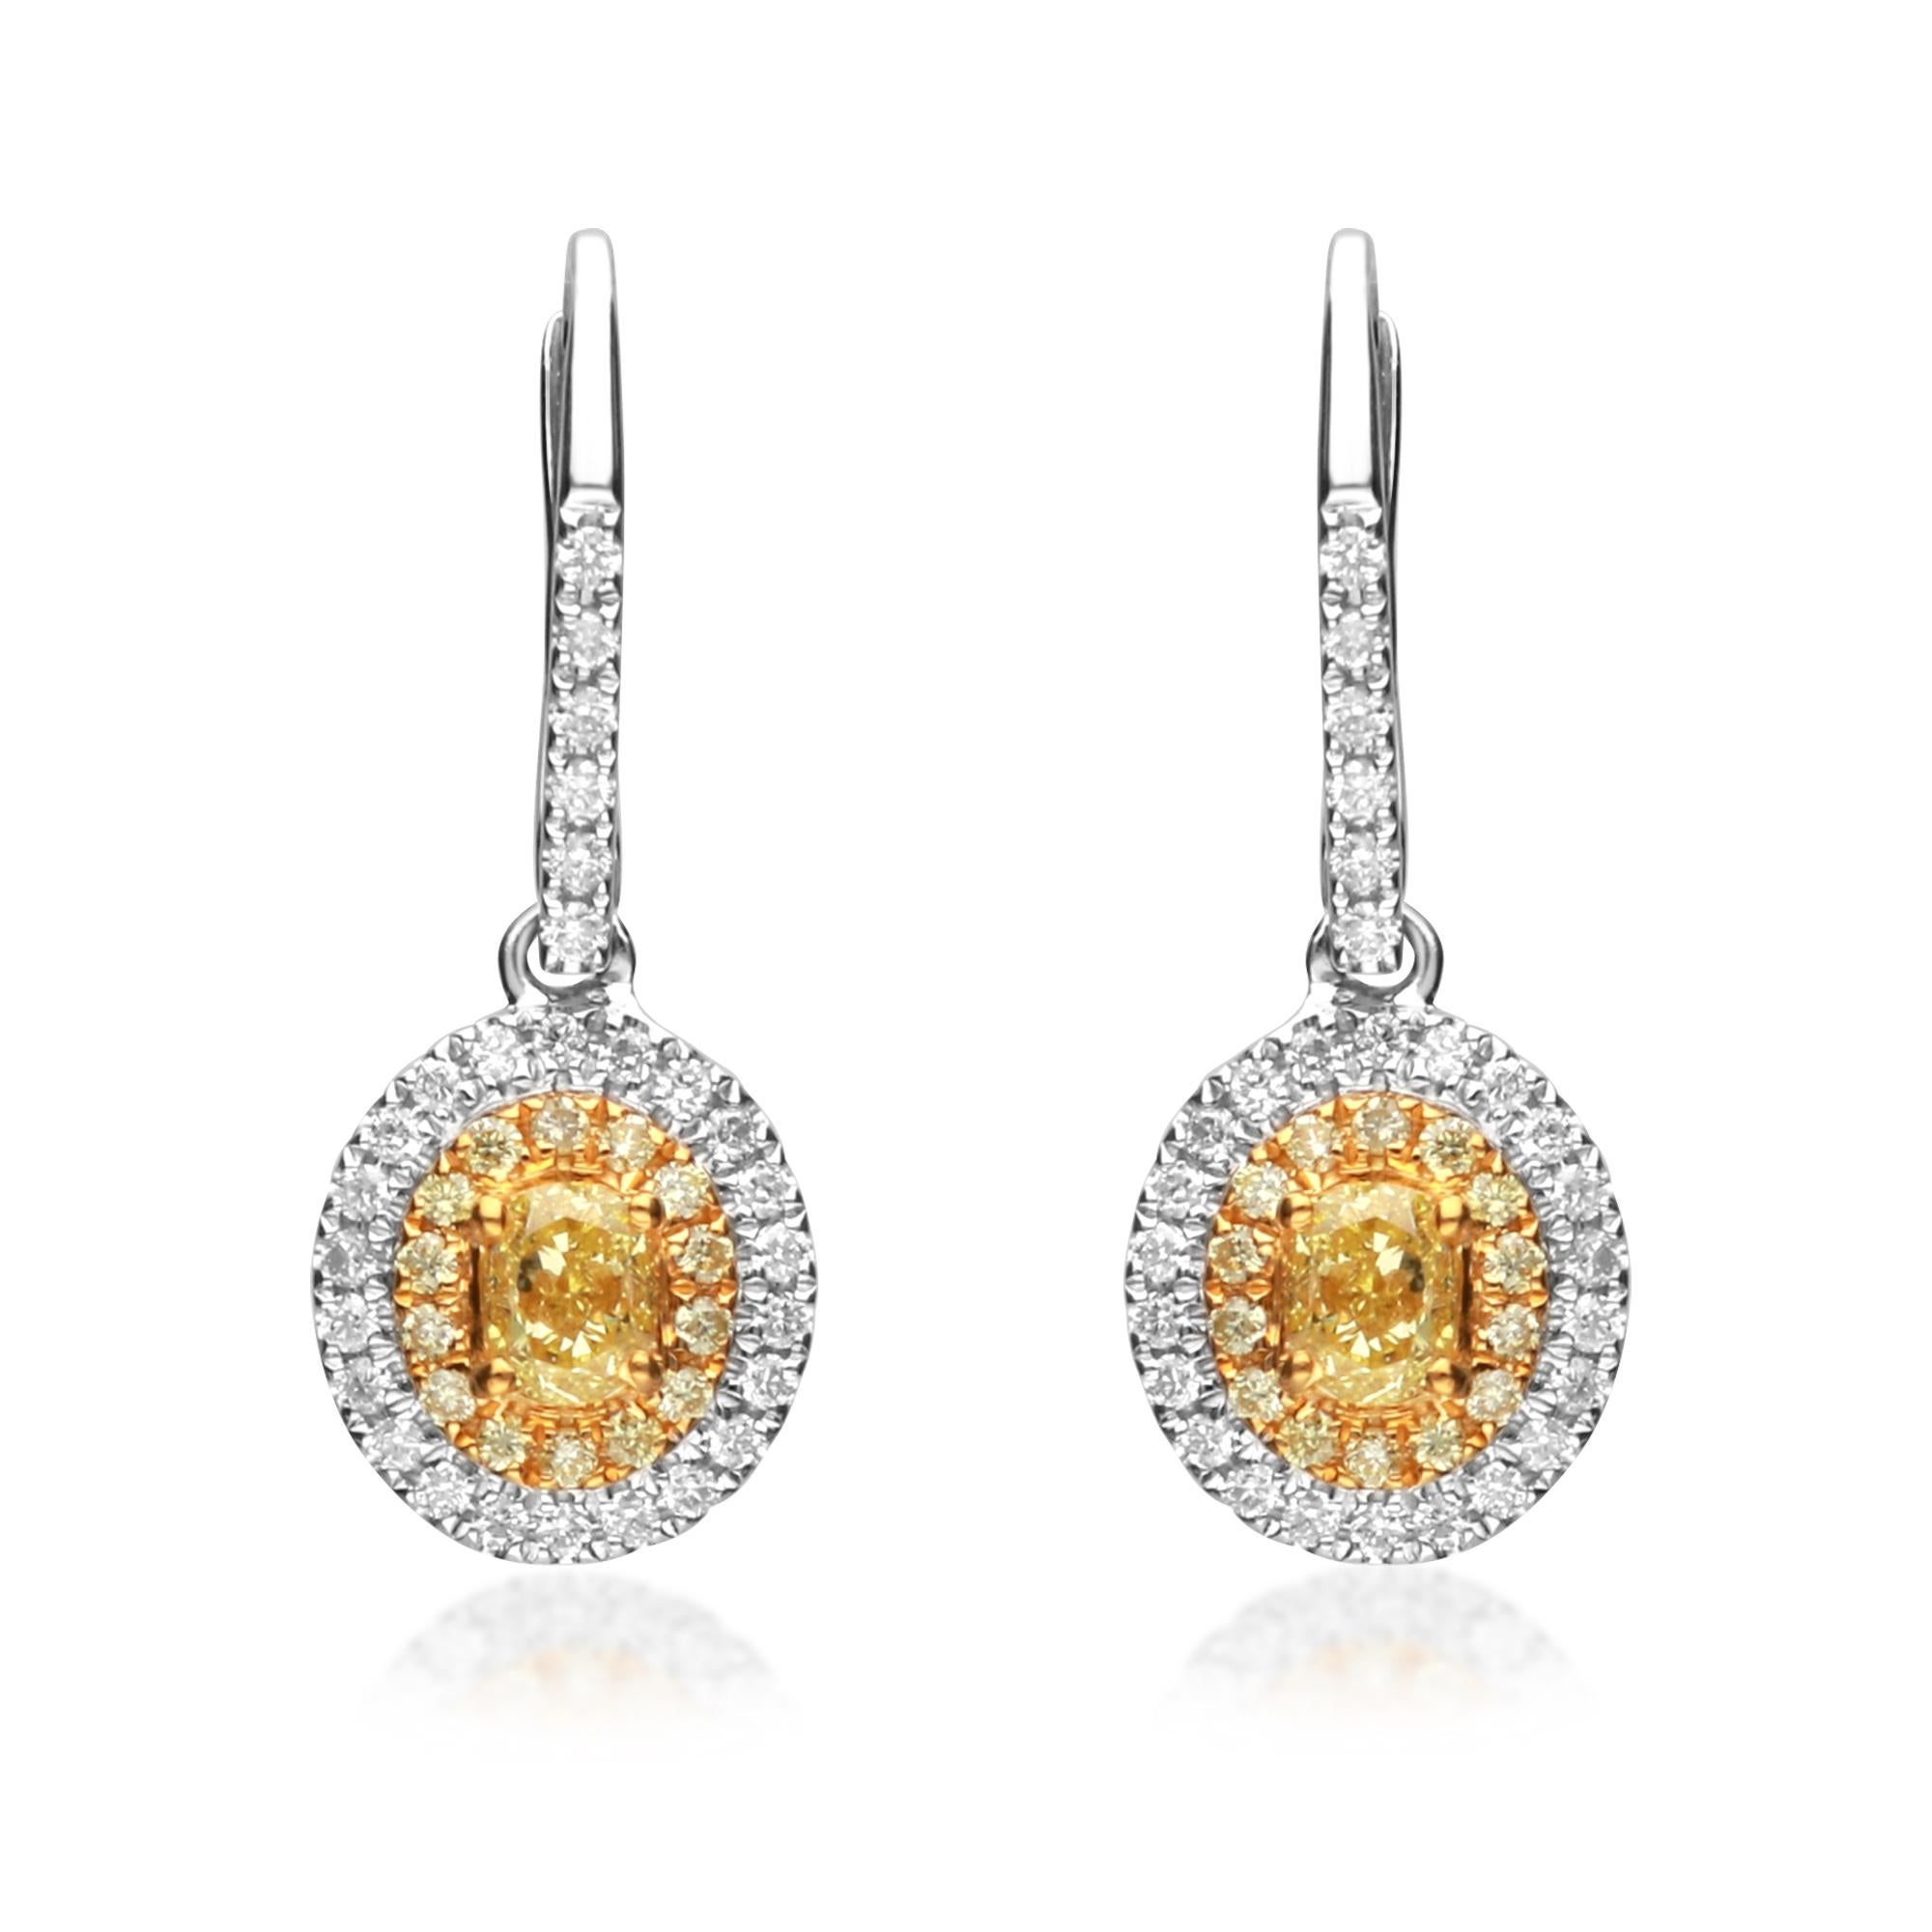 This beautiful pair of 18kt two tone Yellow diamond earrings by Gin and Grace has center of 2 oval cut Yellow diamonds 0.66 ct. SI quality, surrounded by 28 smaller yellow diamonds 0.18 ct. and 56 round brilliant cut white diamonds 0.37 carat GH -SI